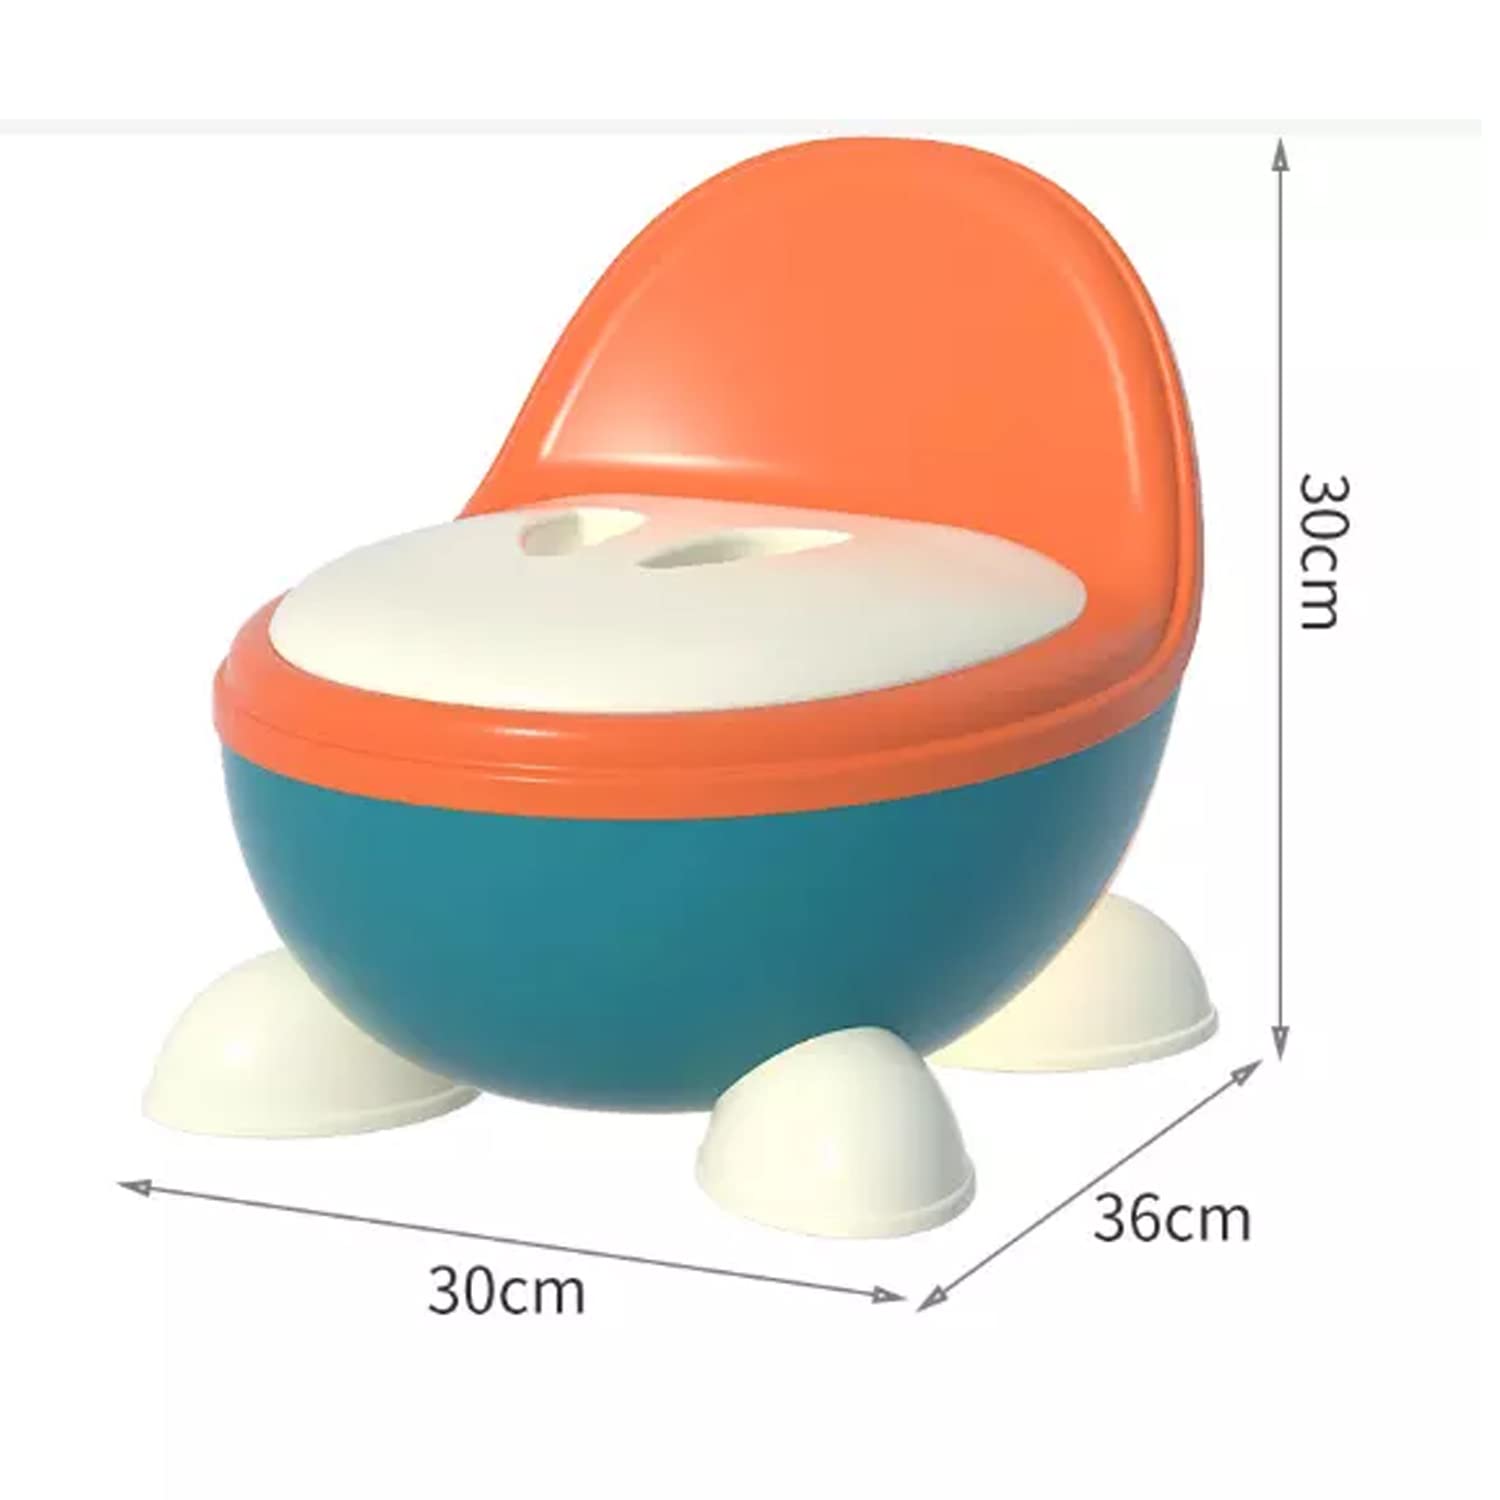 Baby Potty Training Seat  for Toddler Boys Girls Age 6 Months to 4 Years (Blue/Orange)